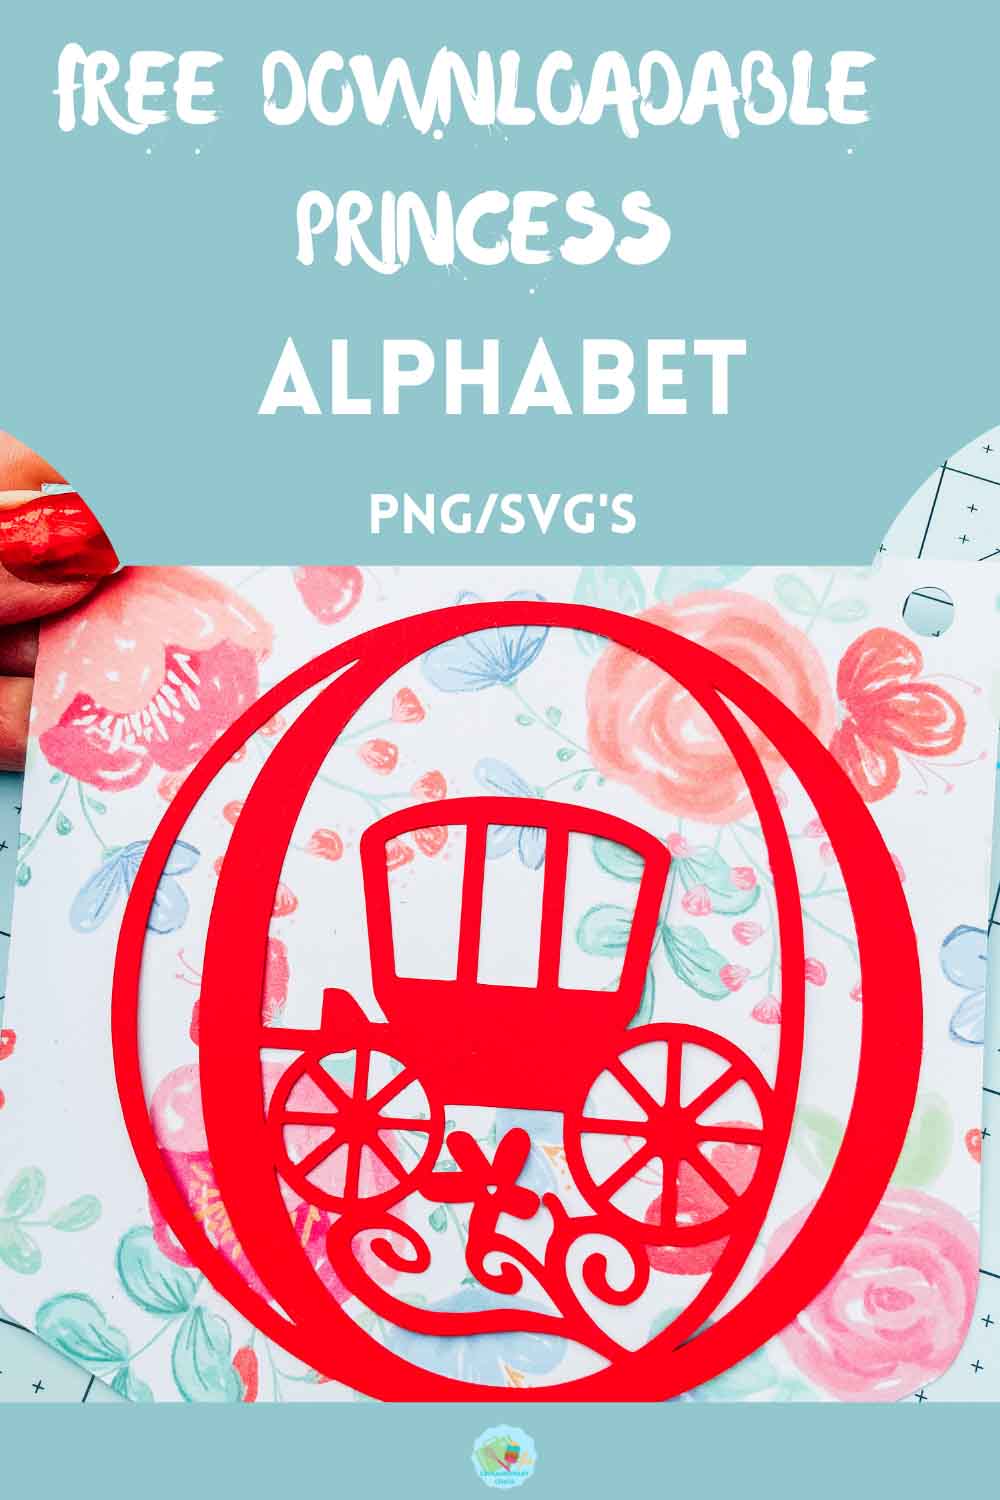 Free PNG_ SVG Princess Alphabet and numbers for scrapbooking and crafting